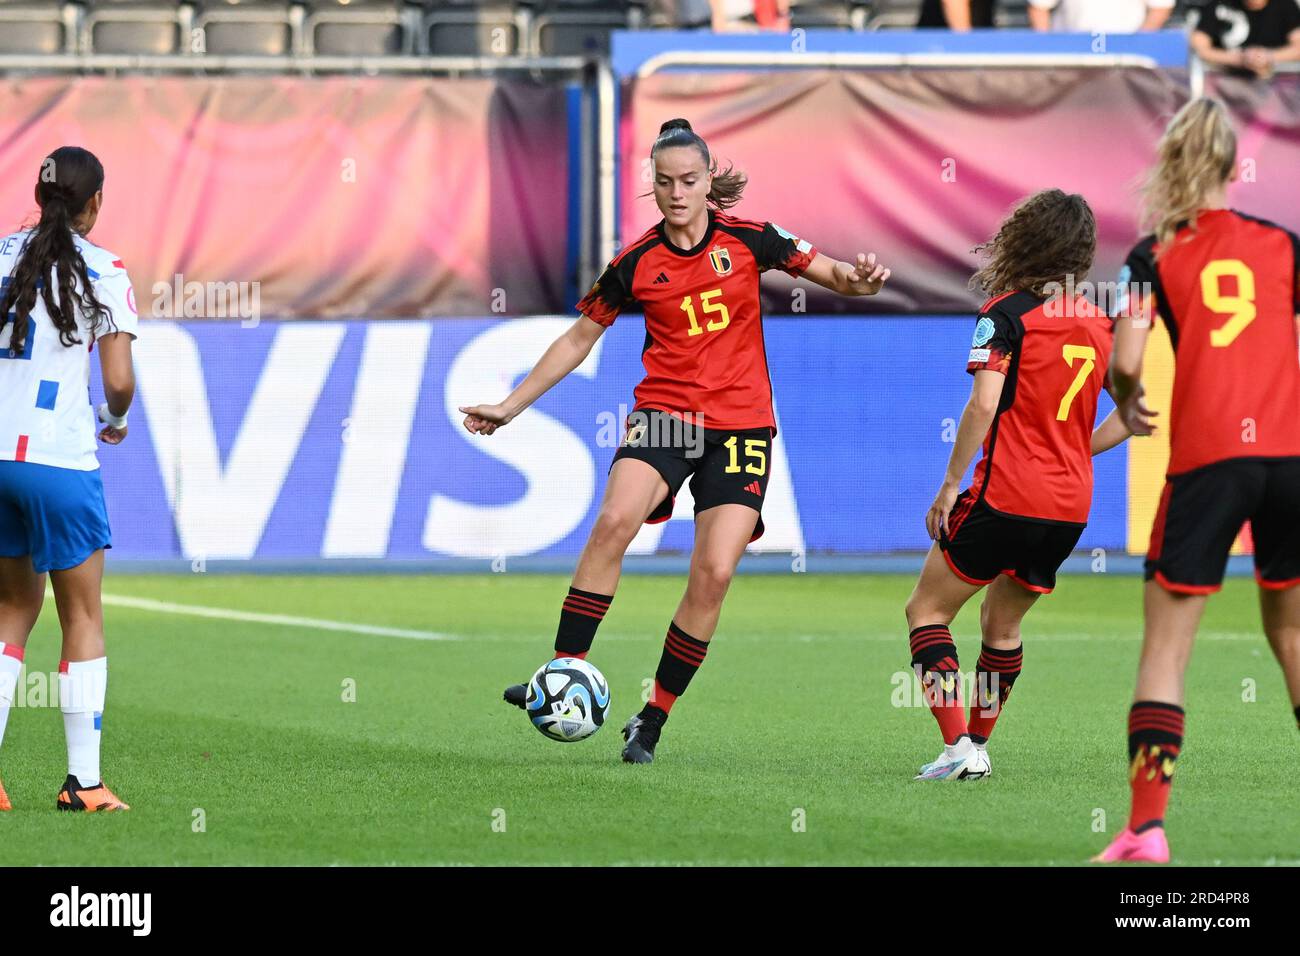 Nadege Francois (15) of Belgium pictured during a female soccer game  between the national women under 19 teams of Belgium and The Netherlands at  the UEFA Women's Under-19 EURO Final Tournament on